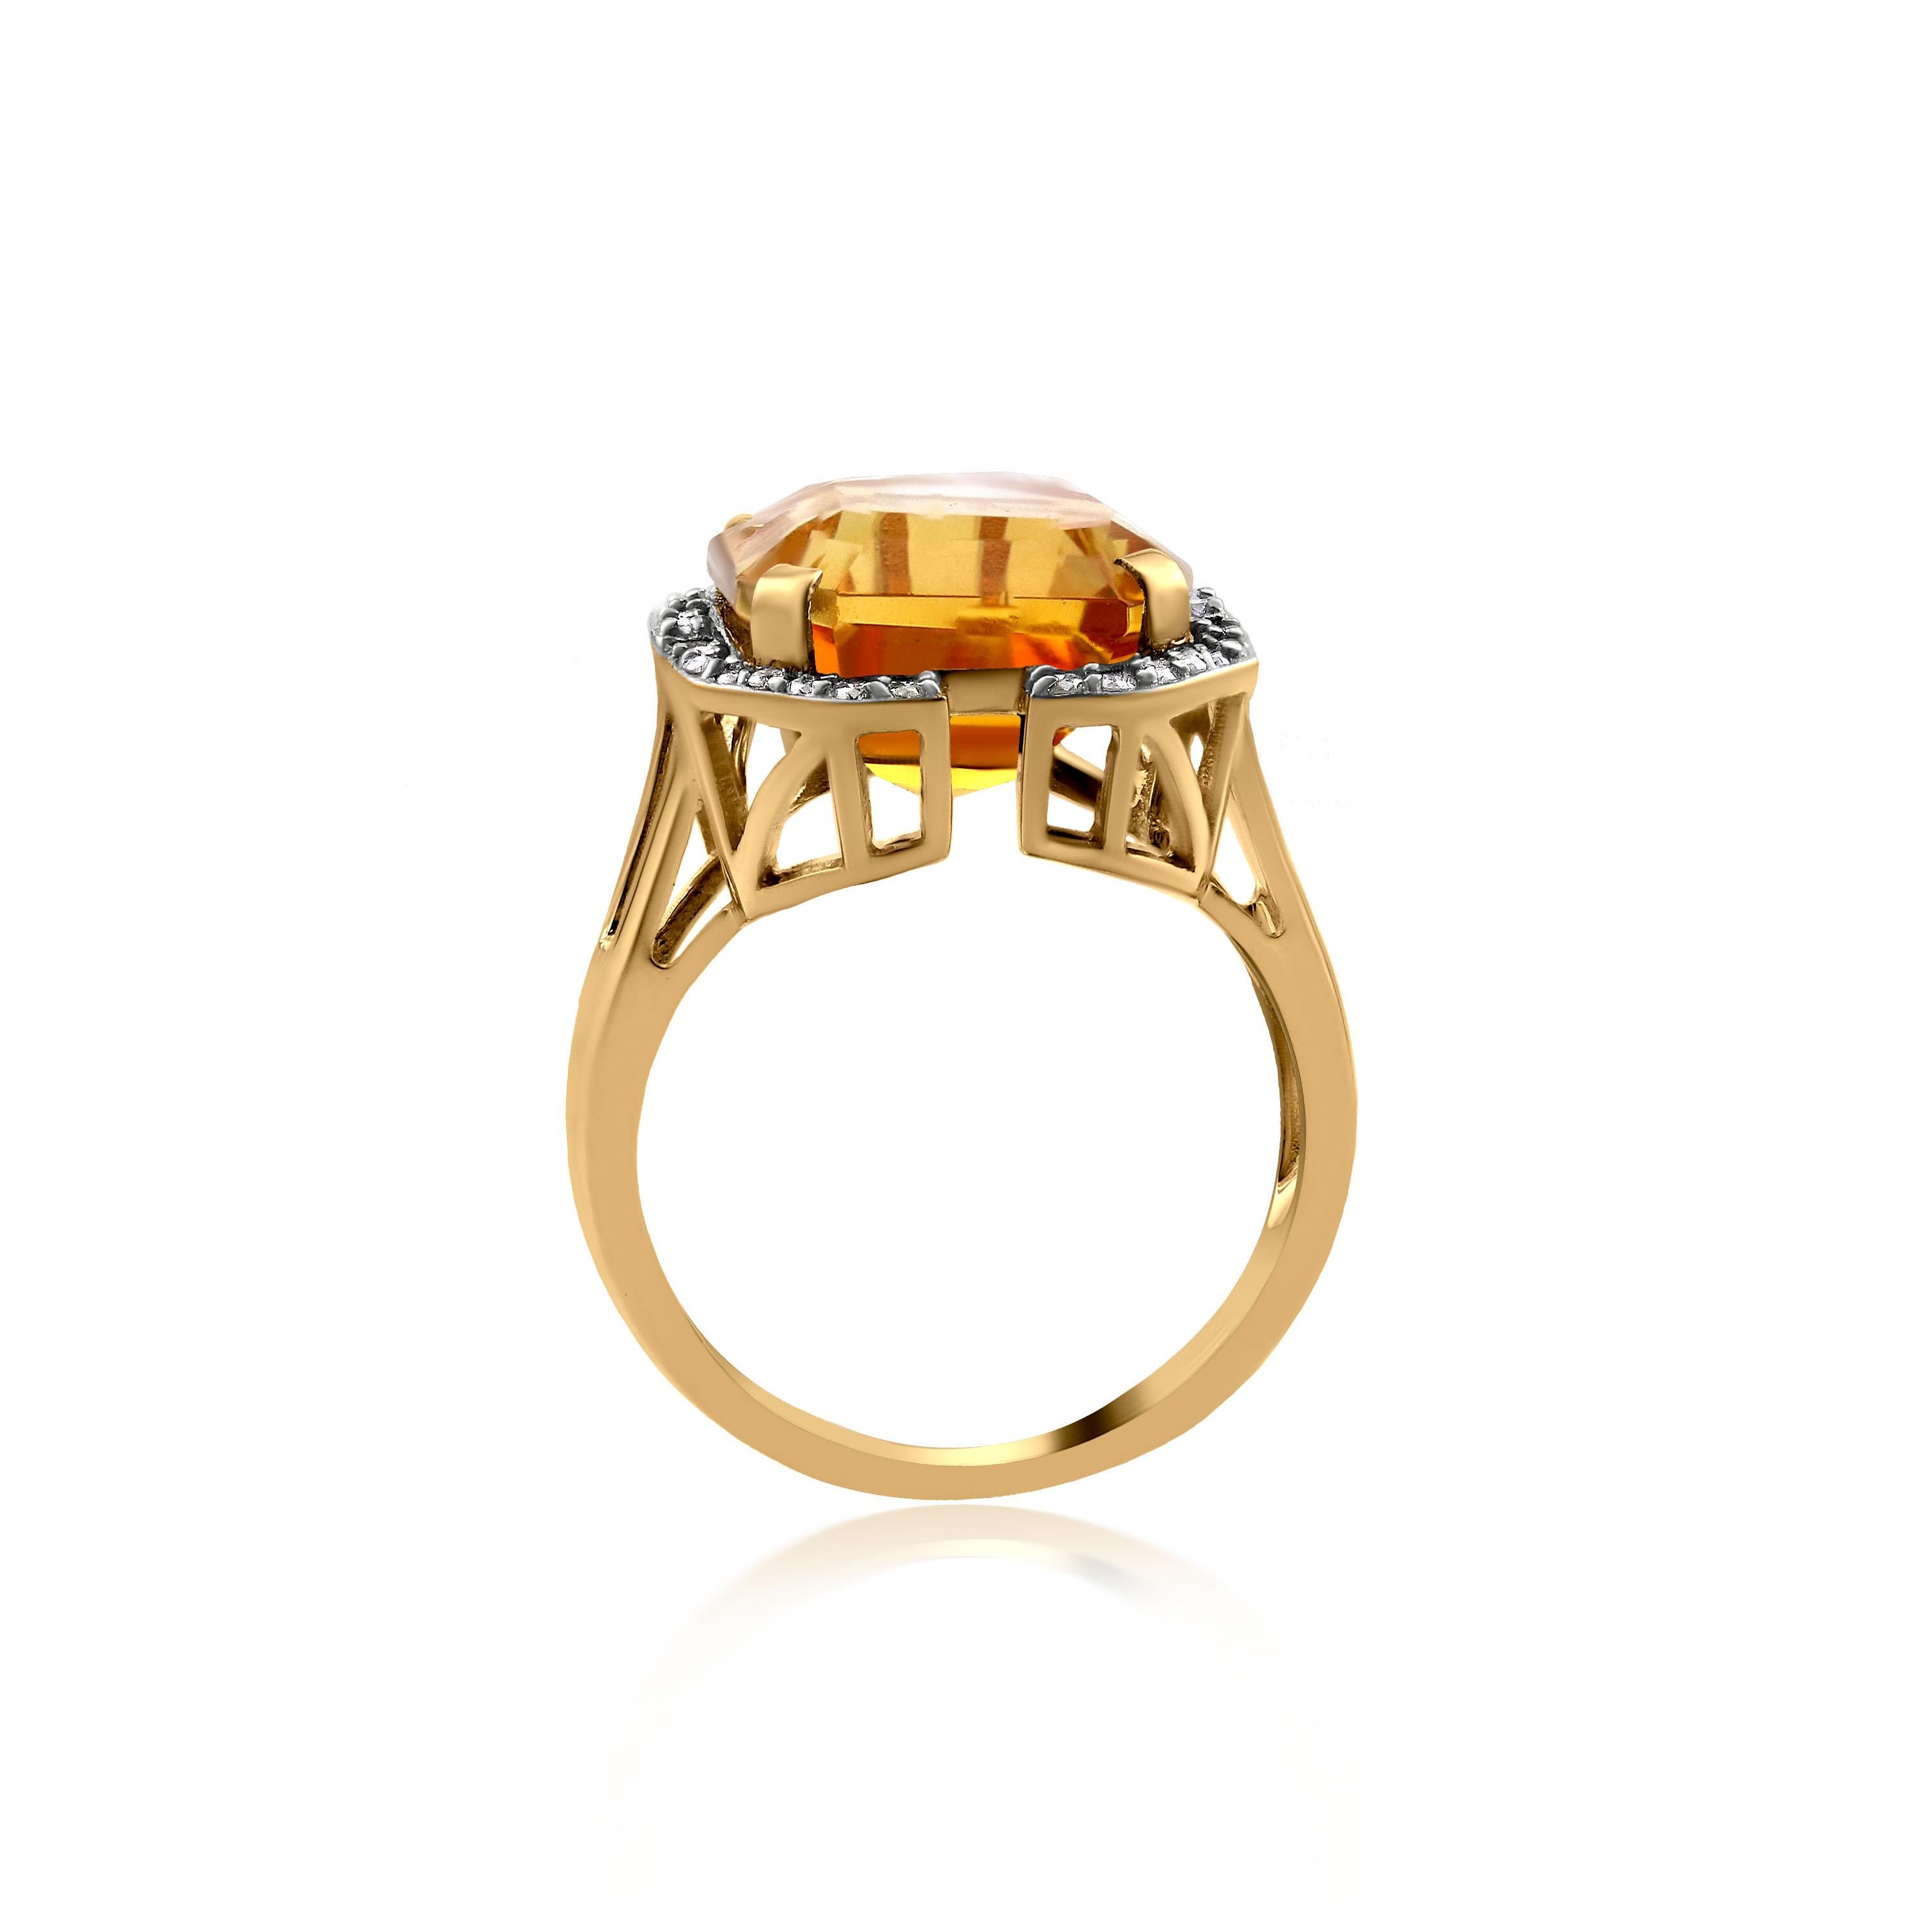 Gemistry 7.4 Carat Asscher Cut Citrine Solitaire Ring with Diamond in 14K Gold 4